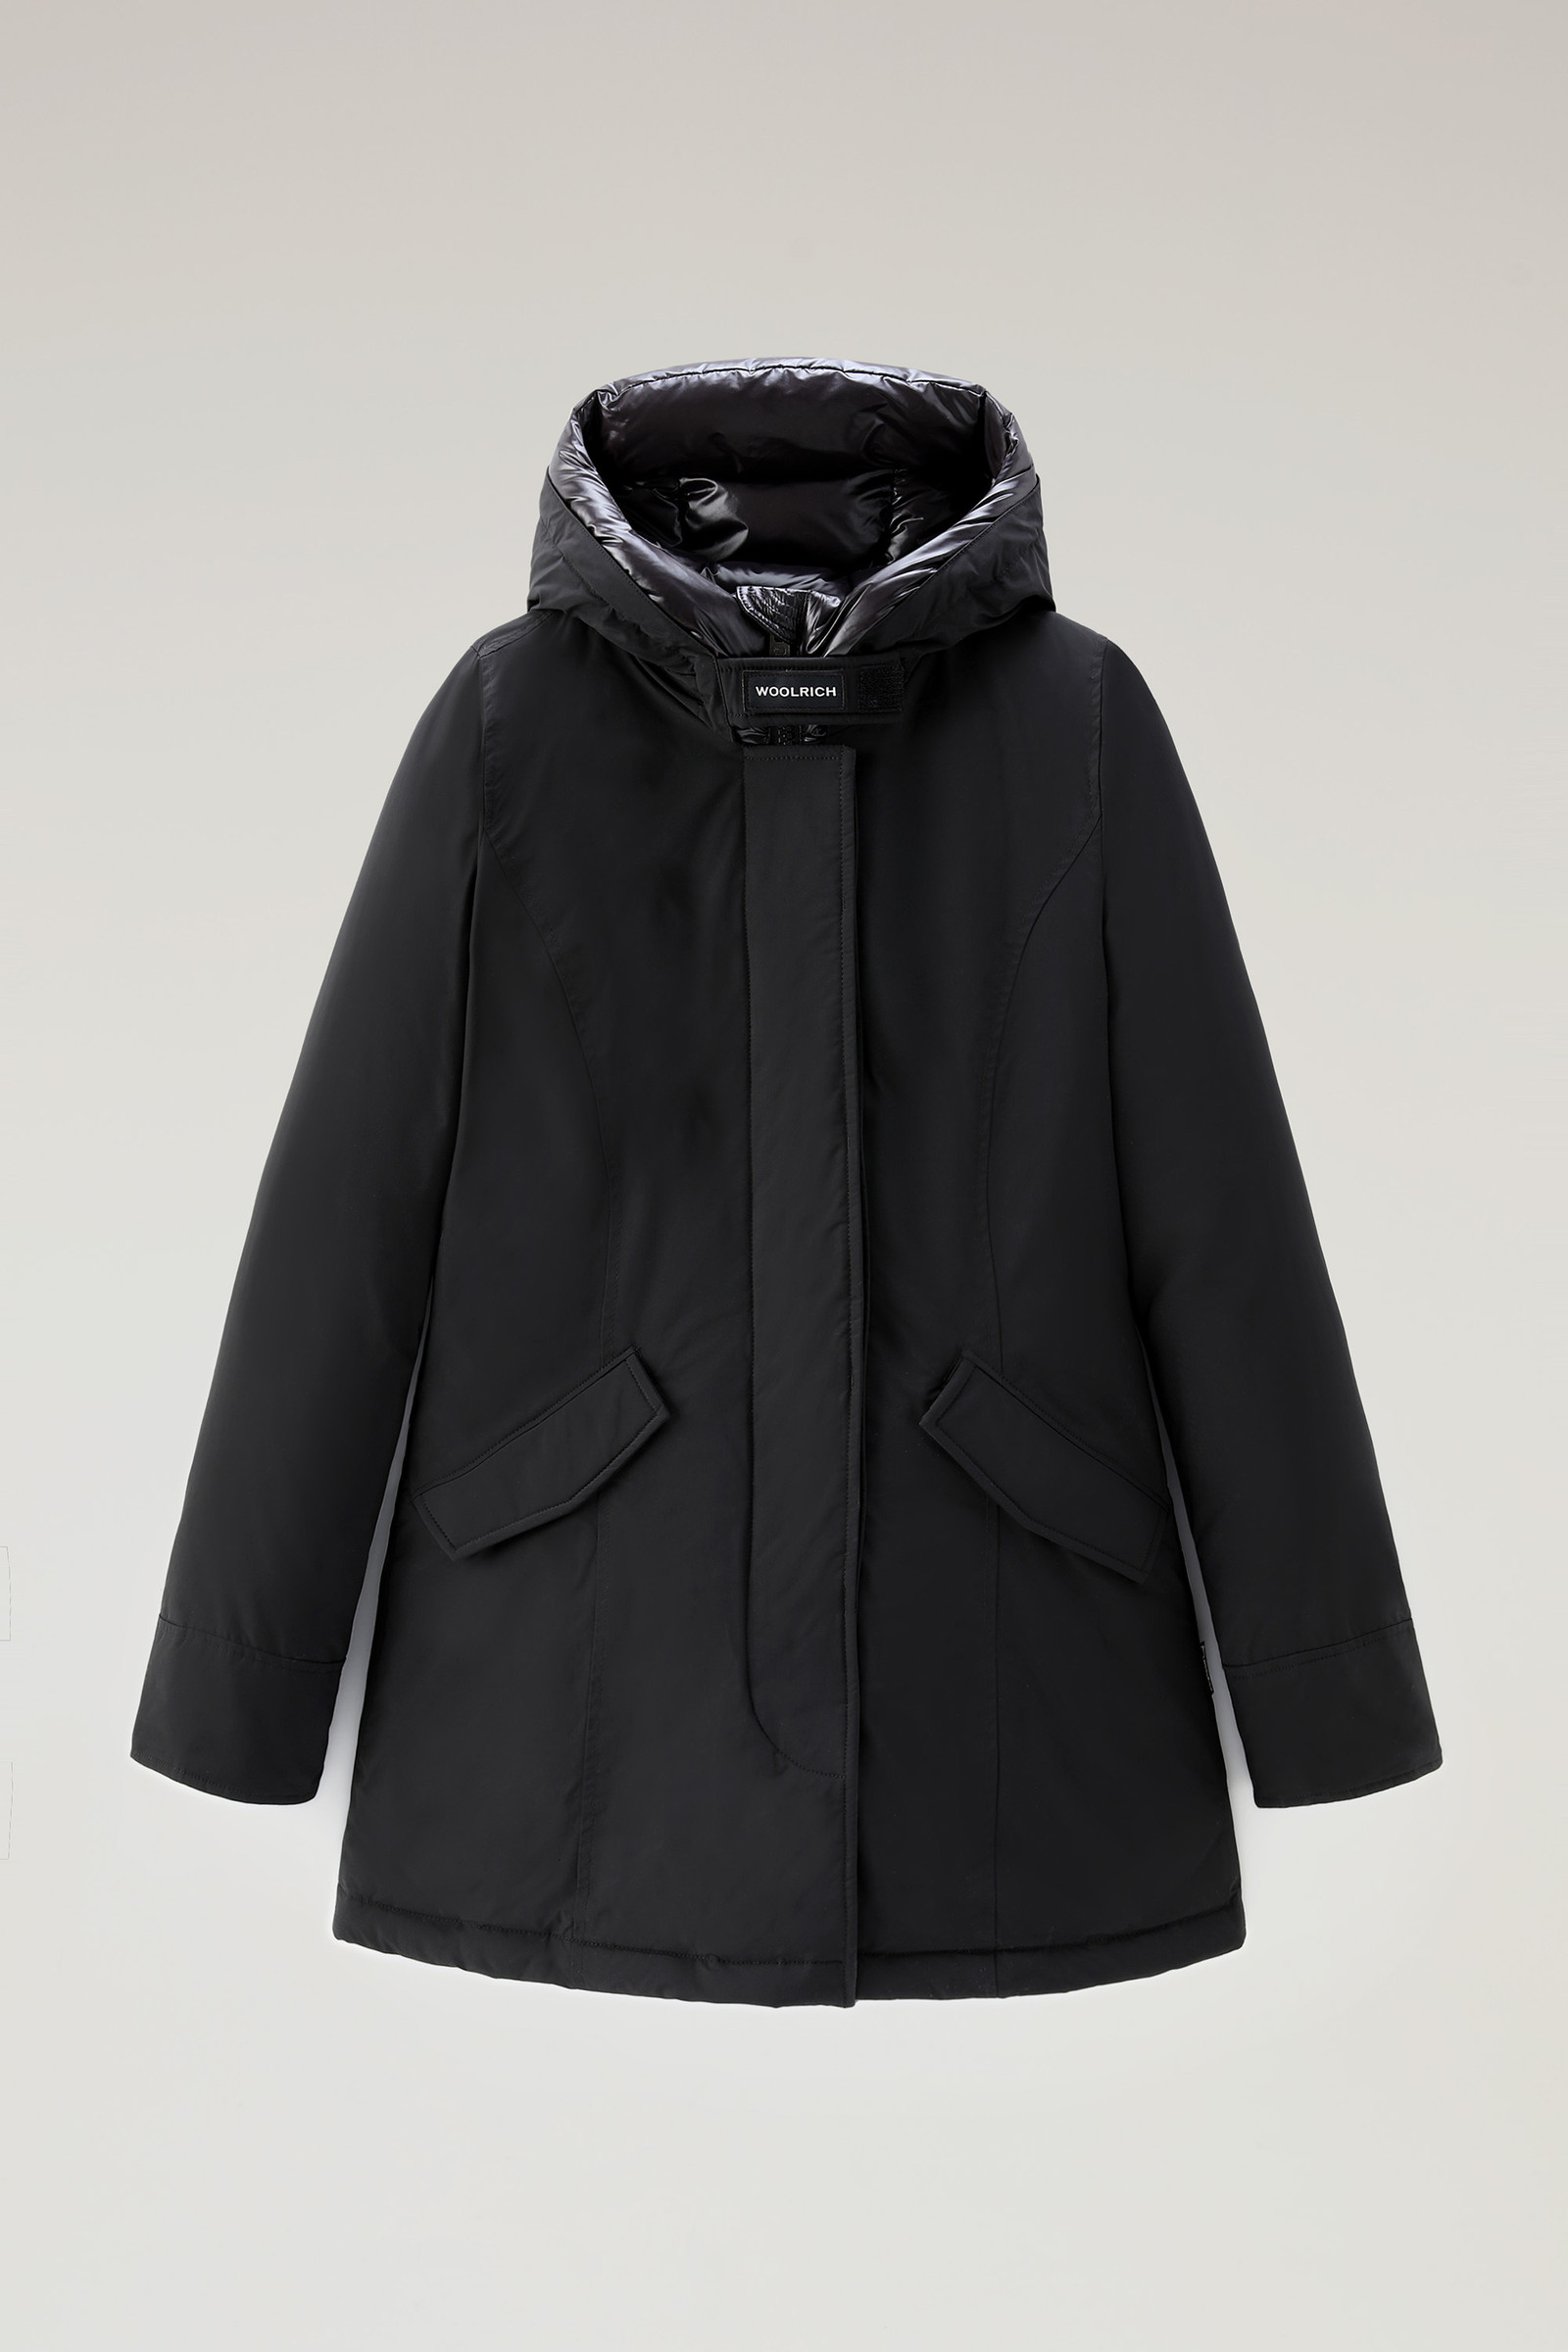 Women's Arctic Parka in Urban Touch Black | Woolrich USA